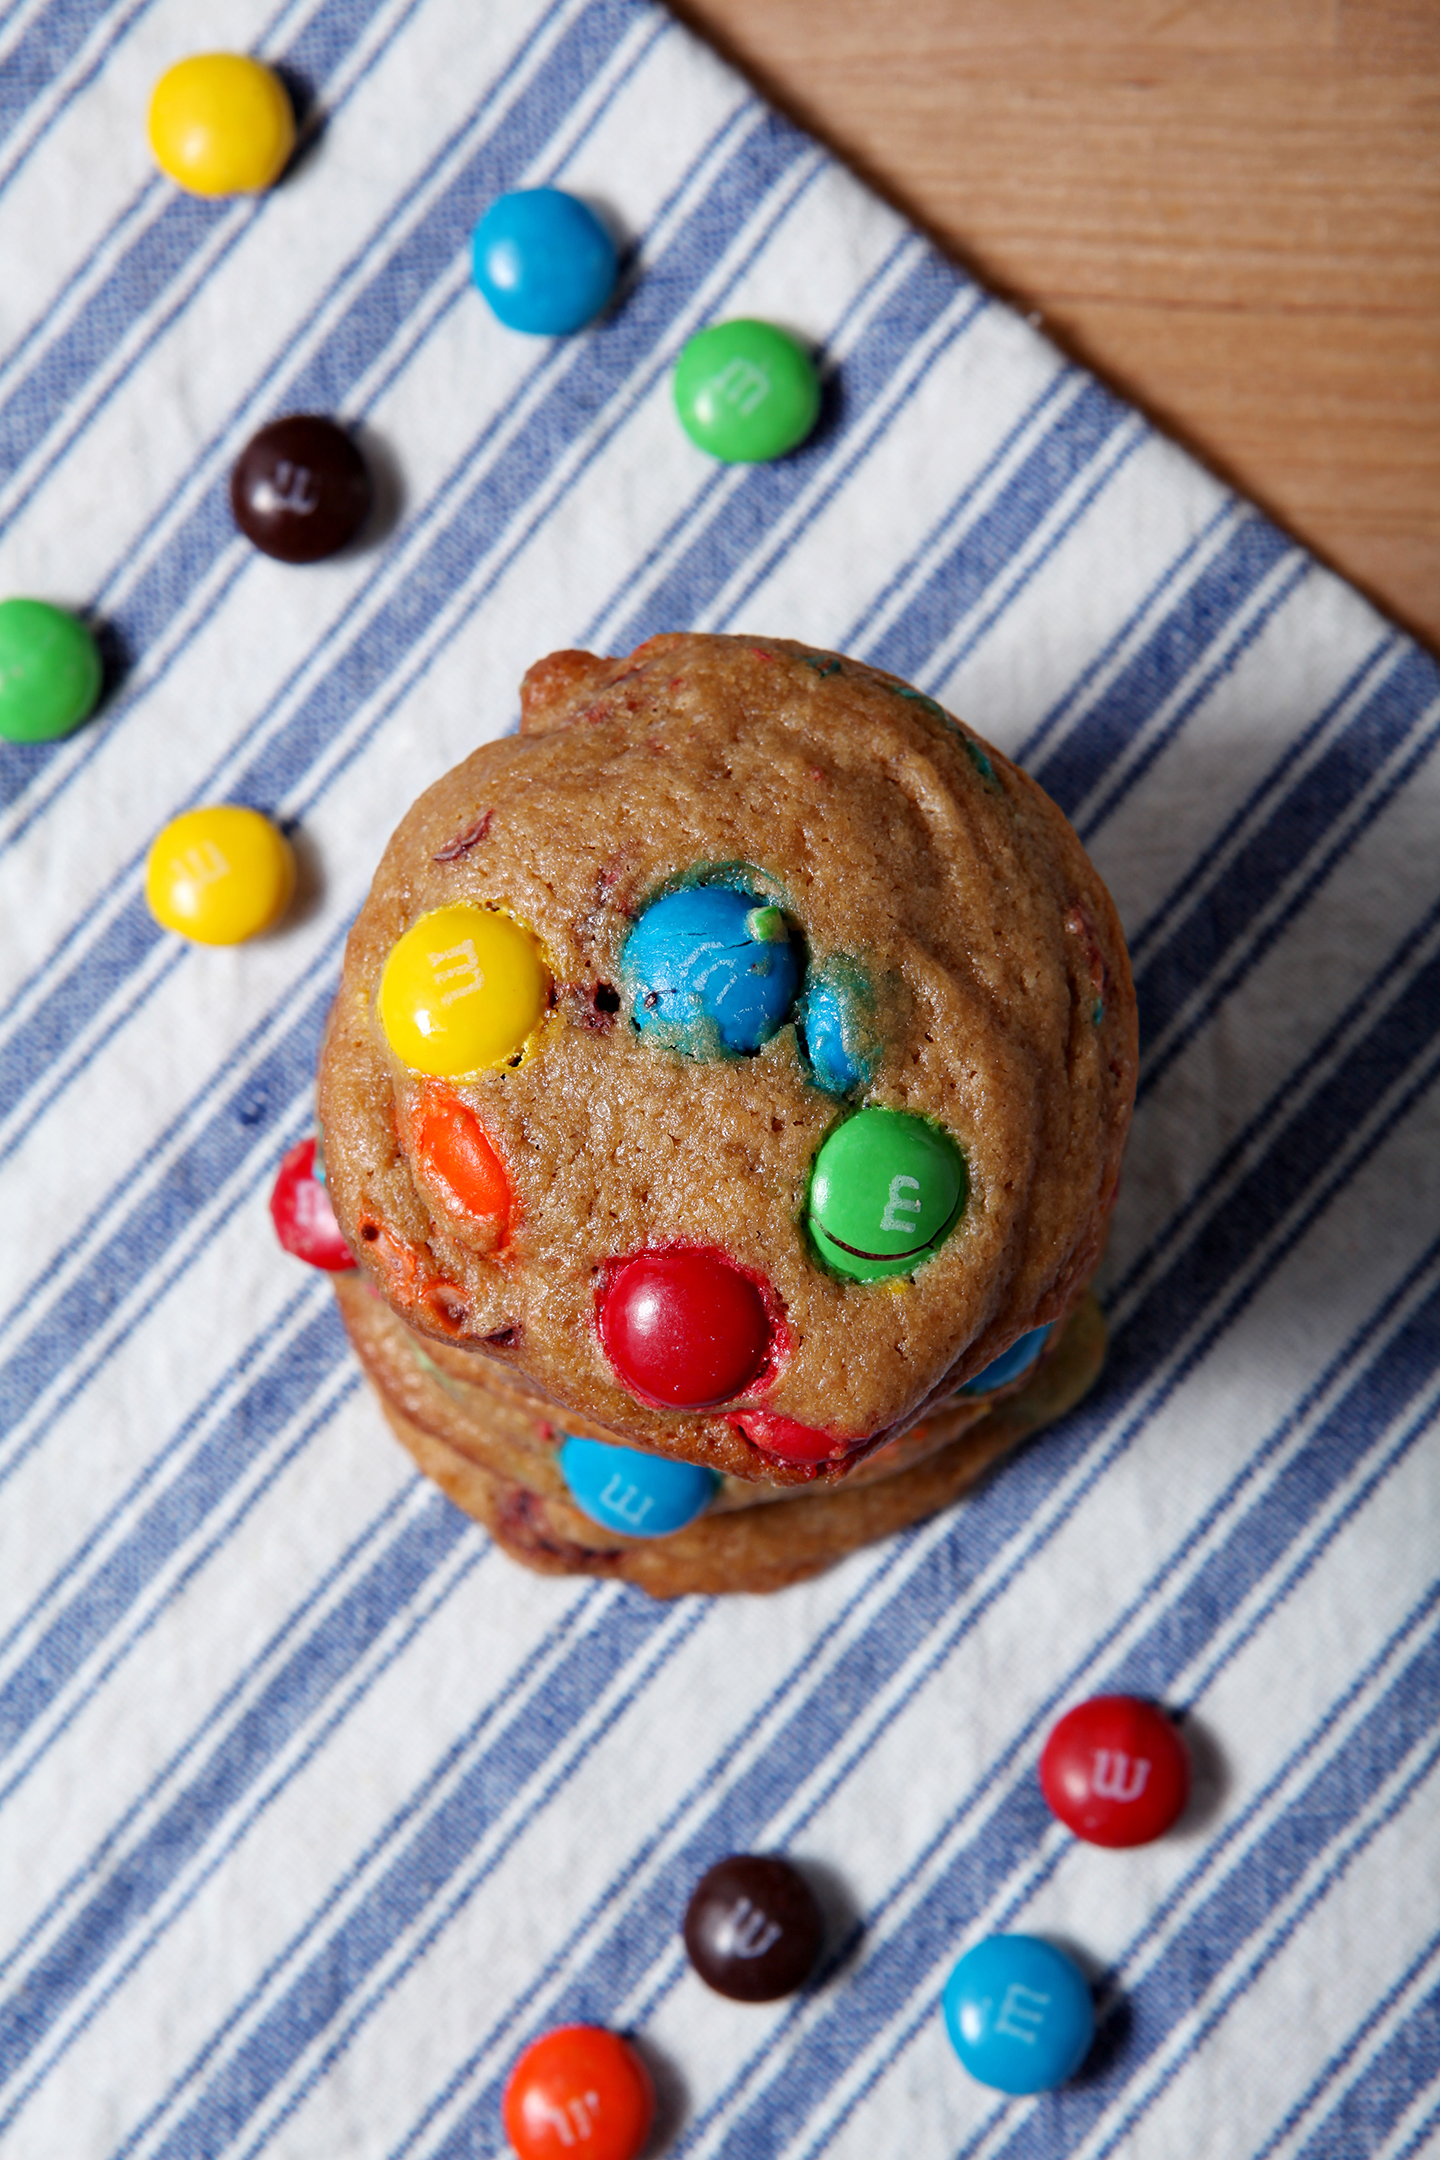 These M&M Cookies are the perfect dessert! The miniature sugar cookies are sweet, fluffy and chock full of plain M&M's. @speckledpalate for @mycookingspot